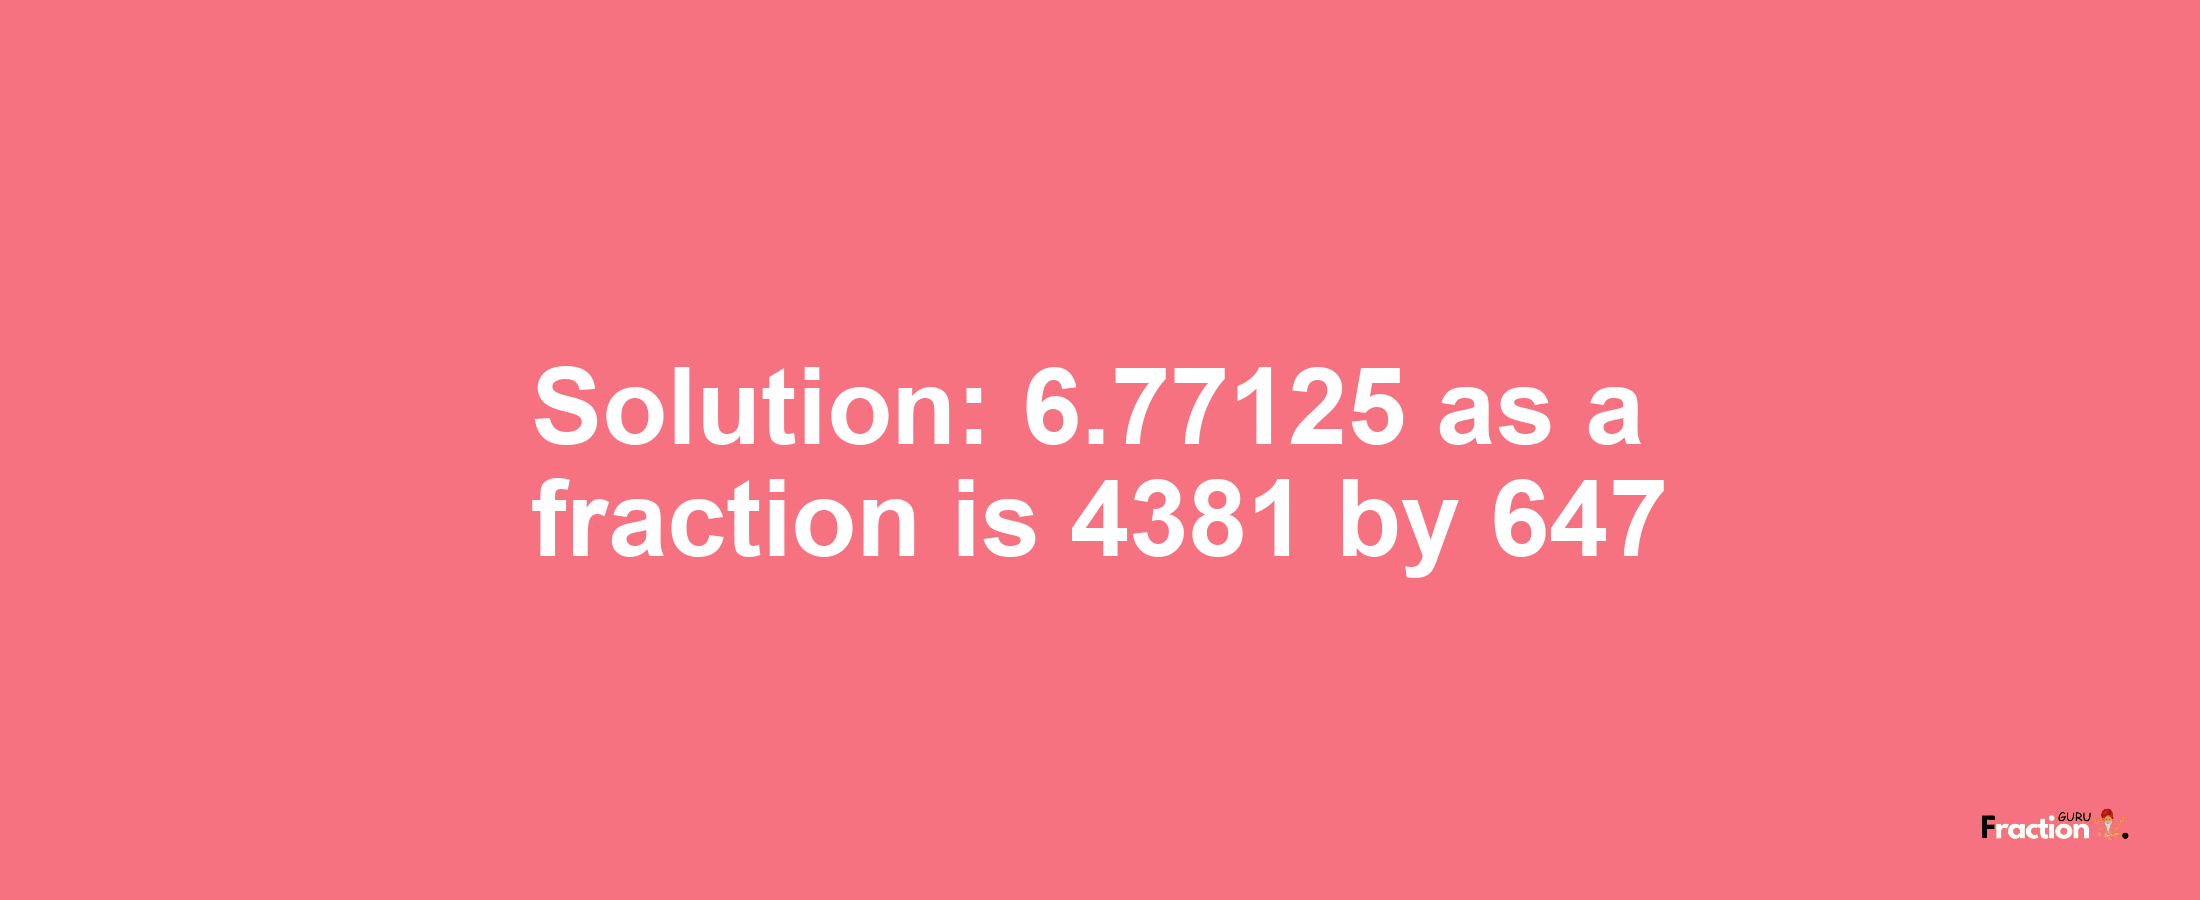 Solution:6.77125 as a fraction is 4381/647